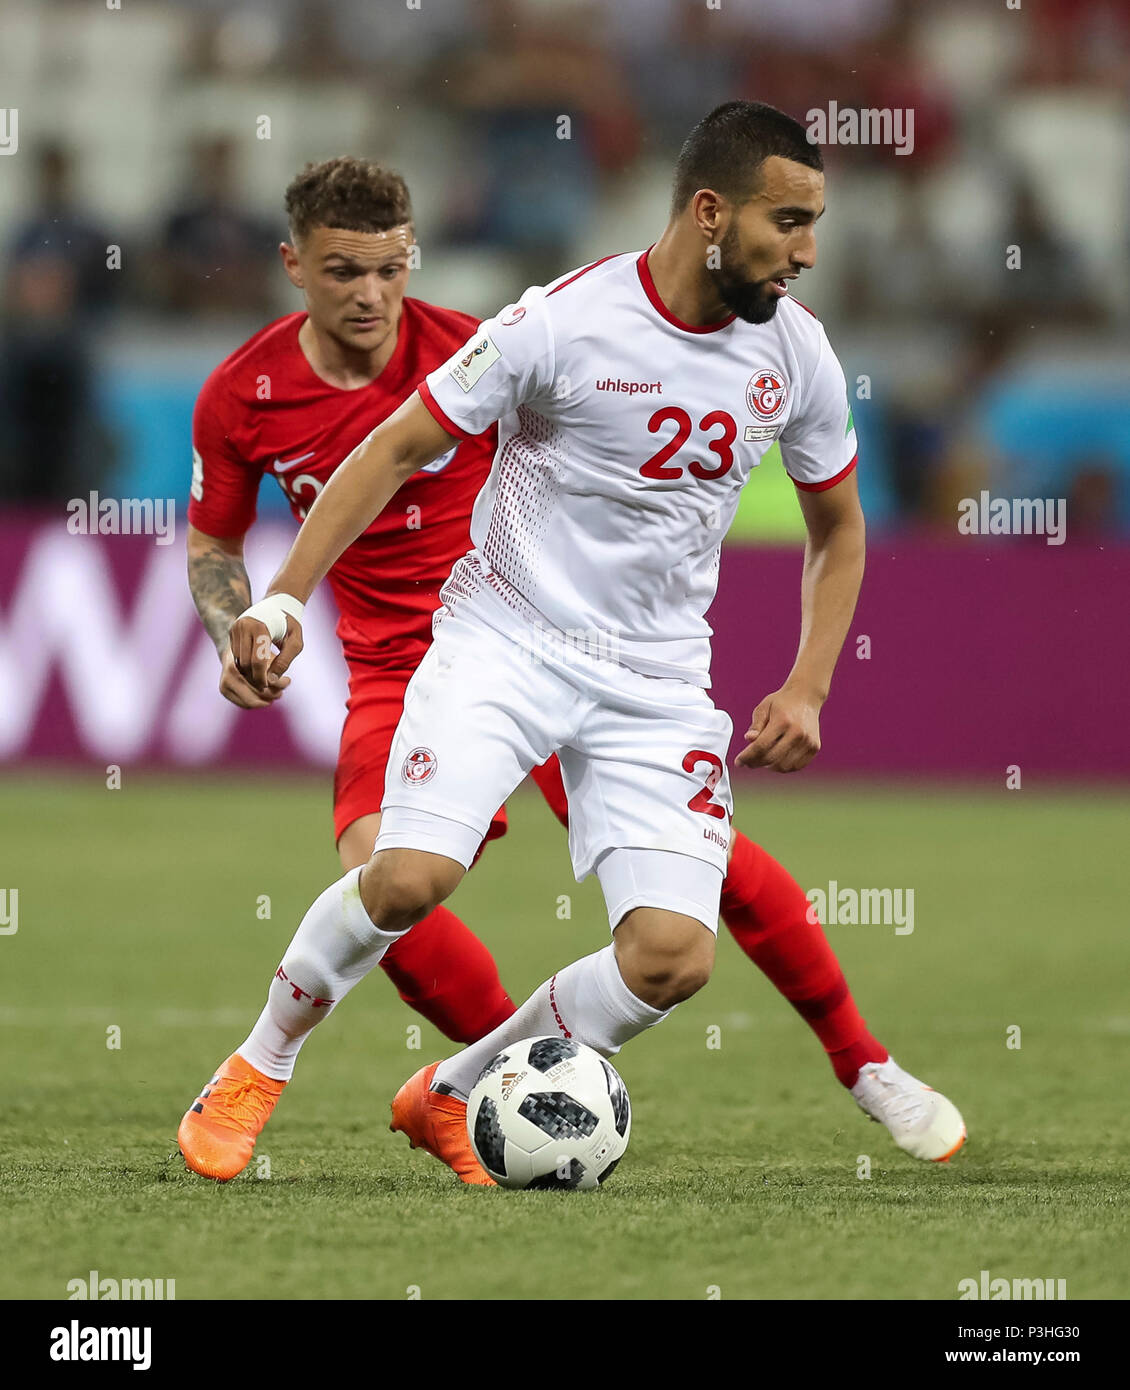 Volgograd, Russia. 18th June, 2018. Kieran Trippier of England and Naim Sliti of Tunisia during the 2018 FIFA World Cup Group G match between Tunisia and England at Volgograd Arena on June 18th 2018 in Volgograd, Russia.  Credit: PHC Images/Alamy Live News Stock Photo